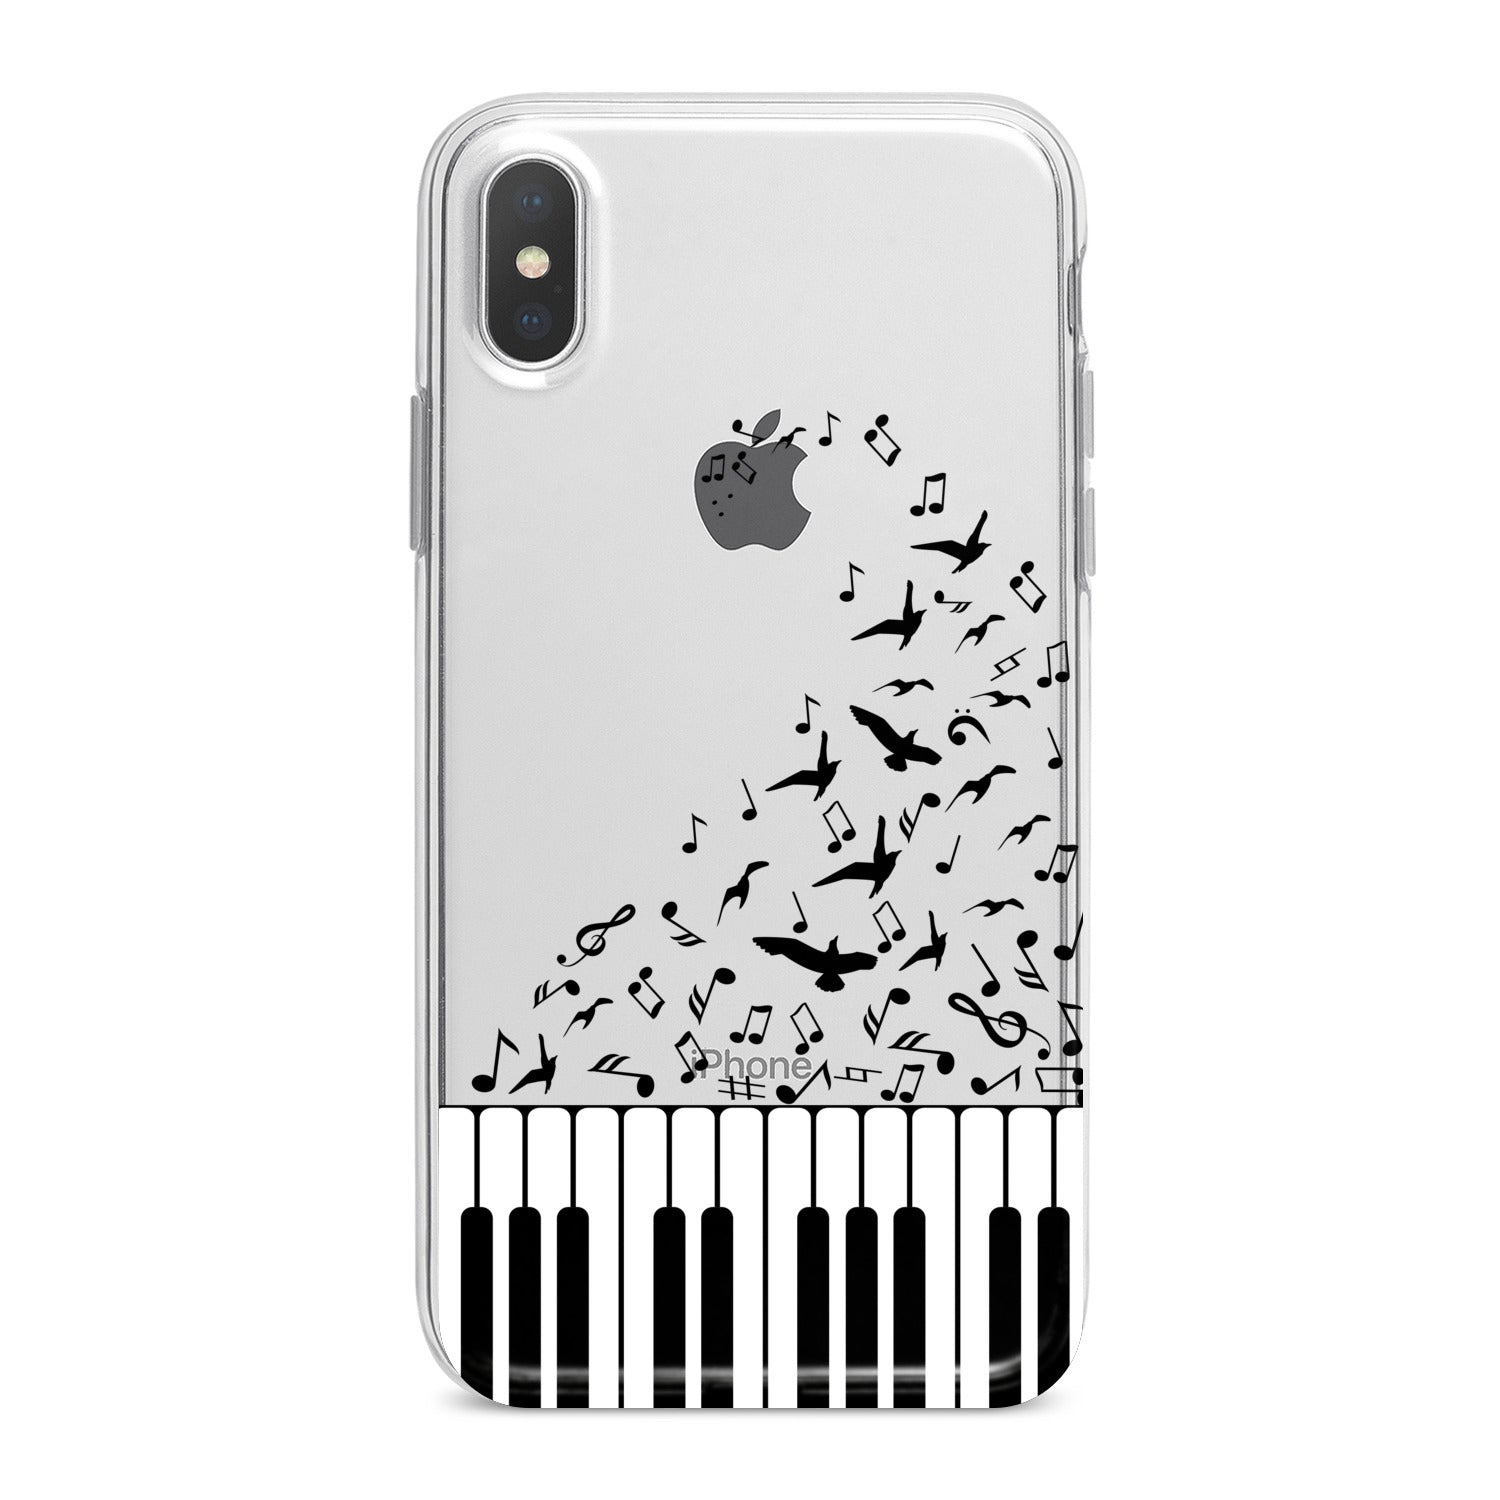 Lex Altern Piano Keys Phone Case for your iPhone & Android phone.